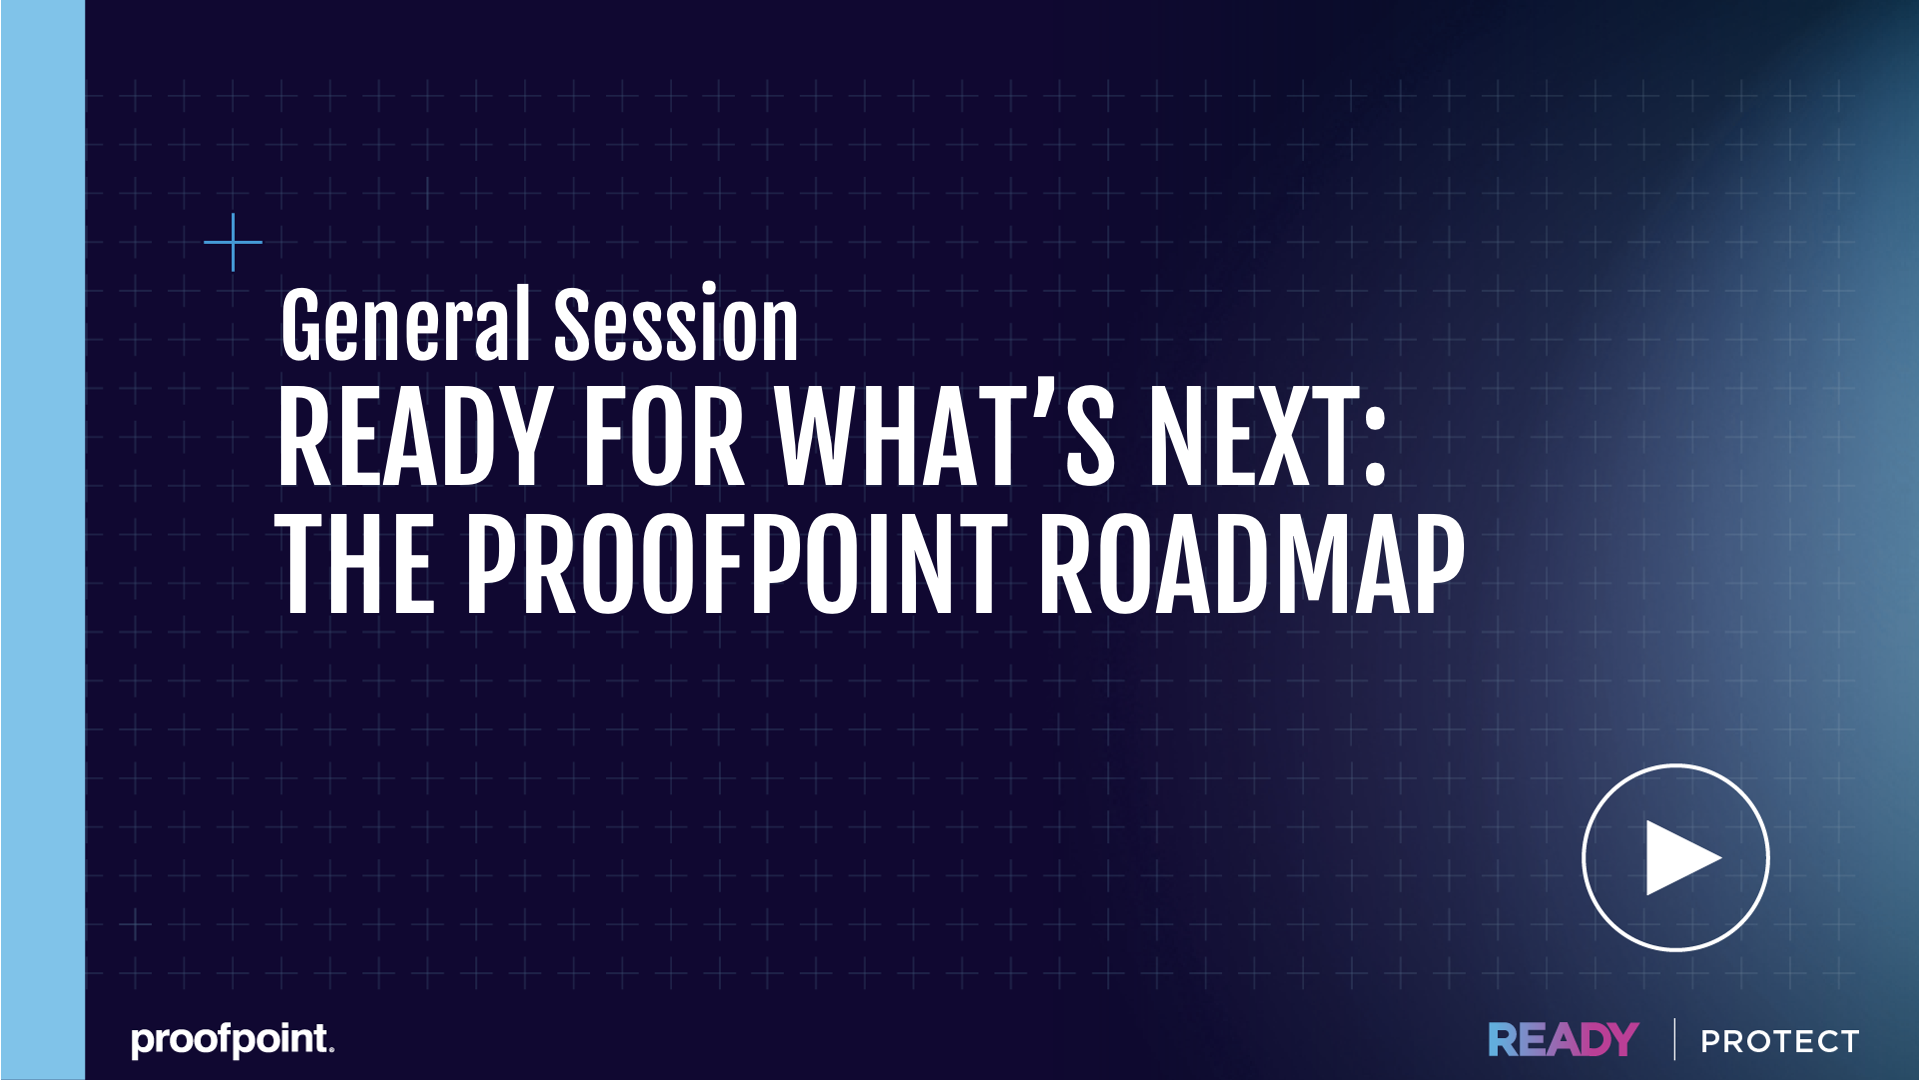 Ready for What’s Next: The Proofpoint Roadmap